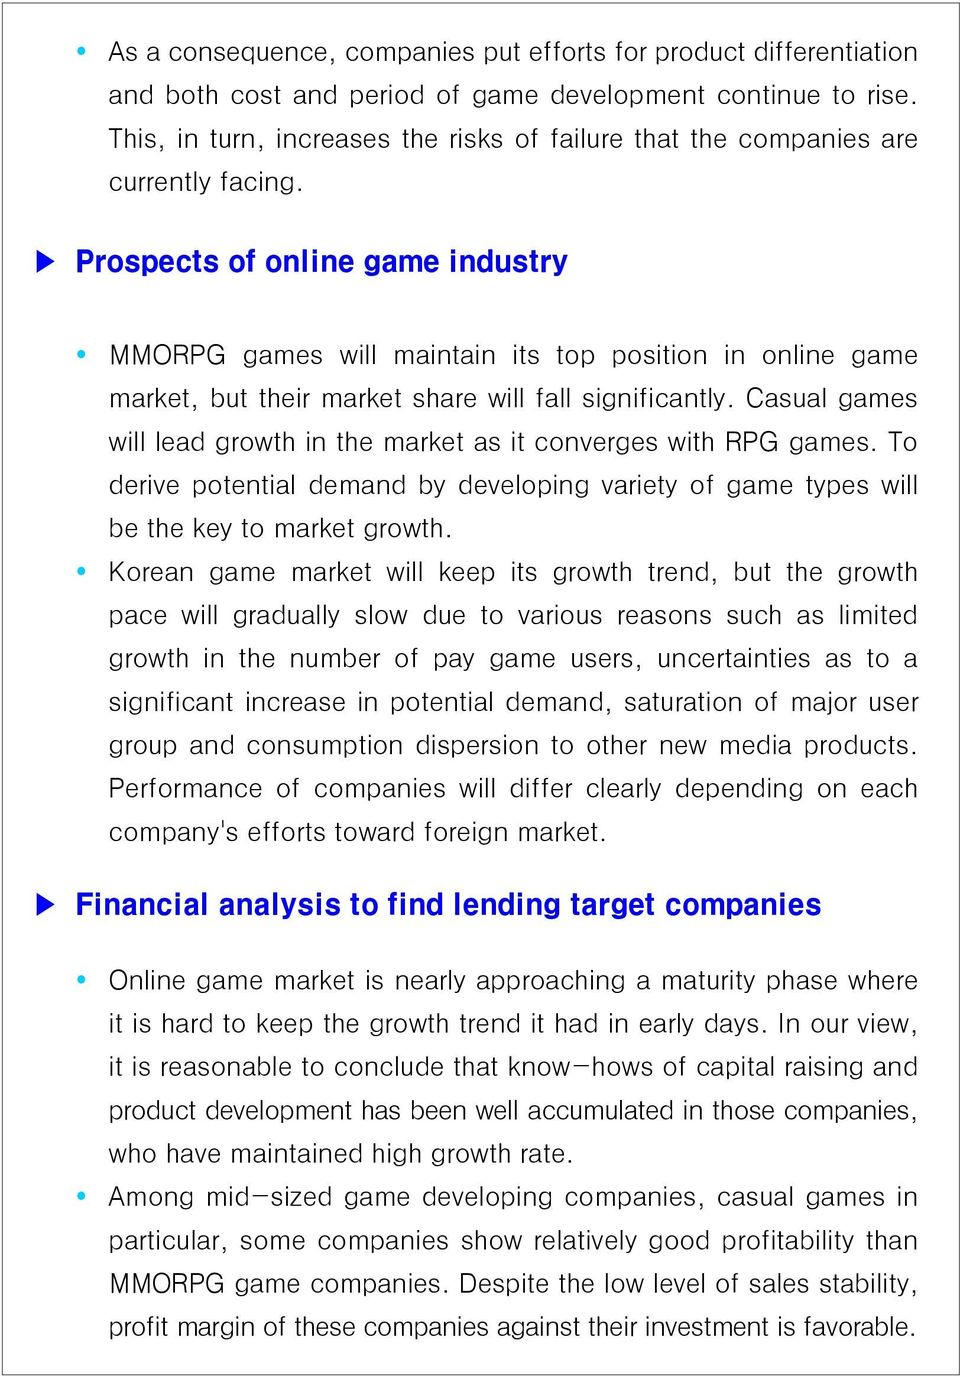 Prospects of online game industry MMORPG games will maintain its top position in online game market, but their market share will fall significantly.